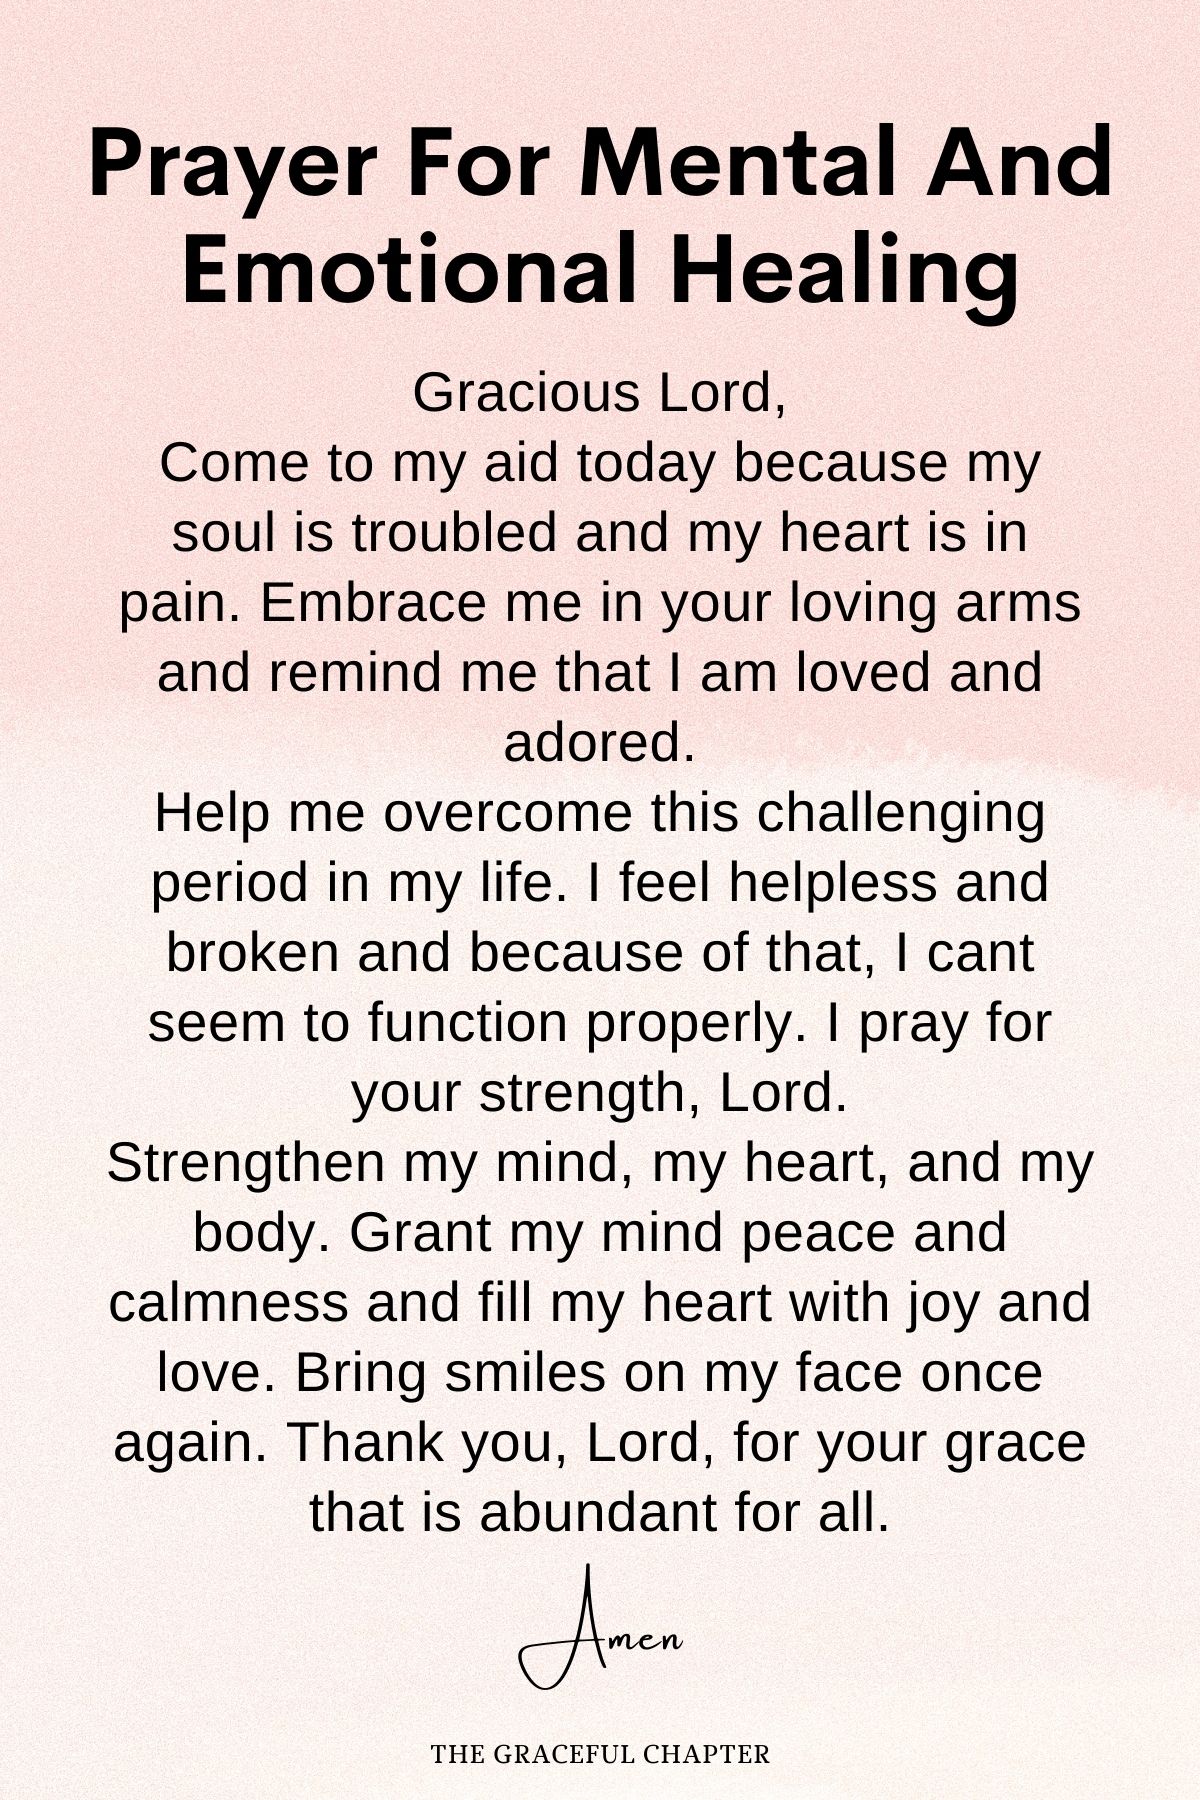 Prayer for mental and emotional healing